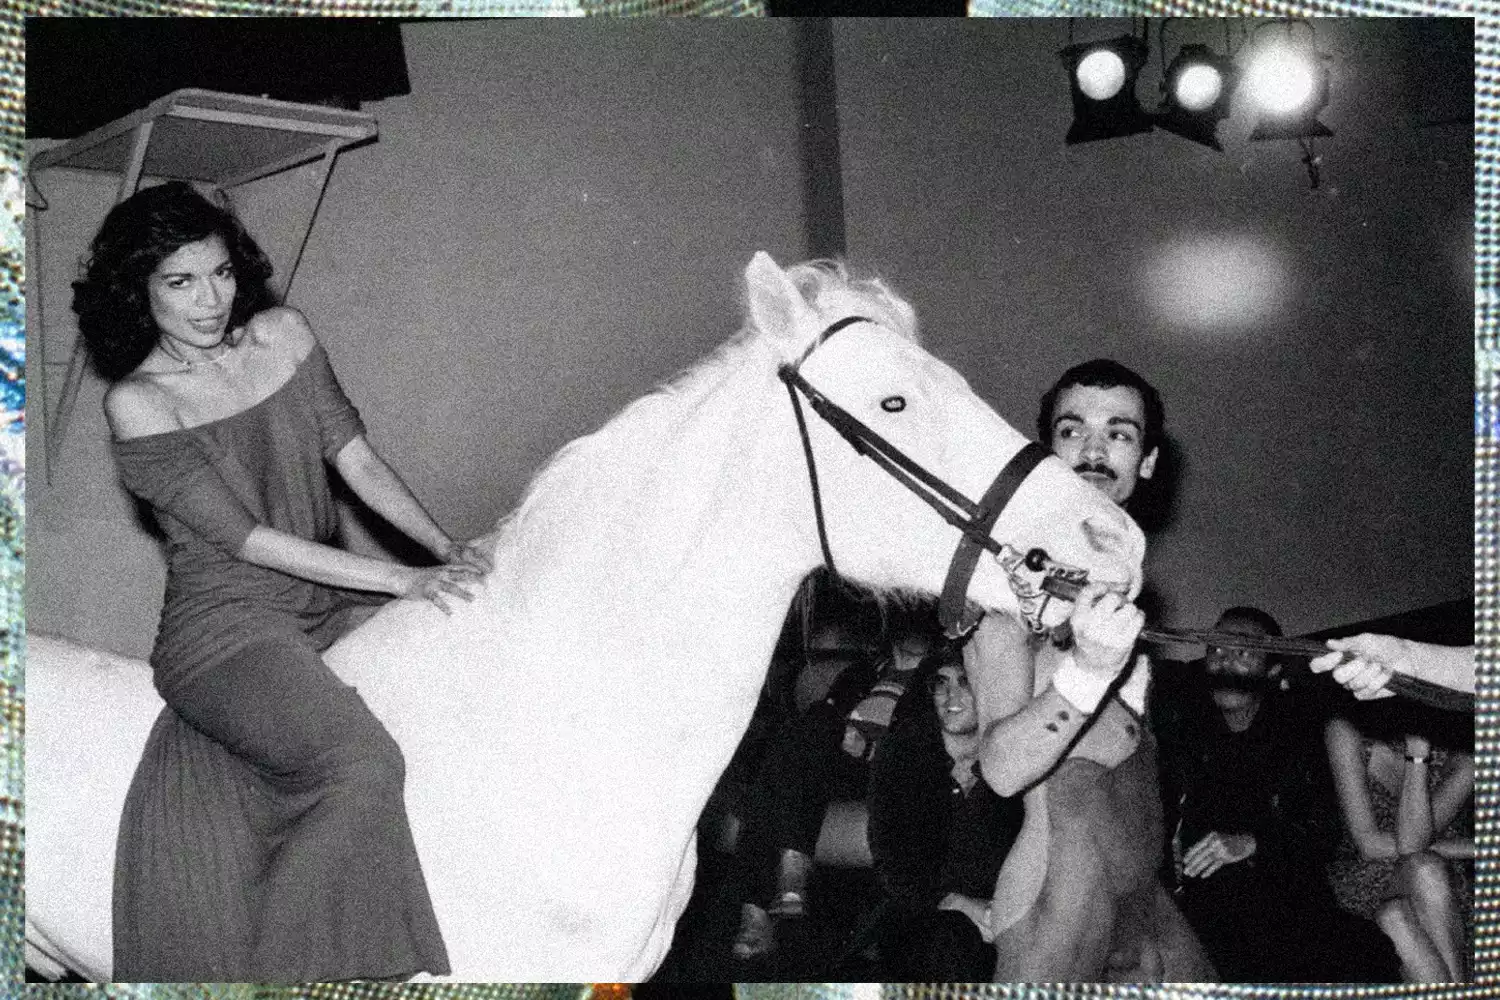 Bianca Jagger at Studio 54 on a horse